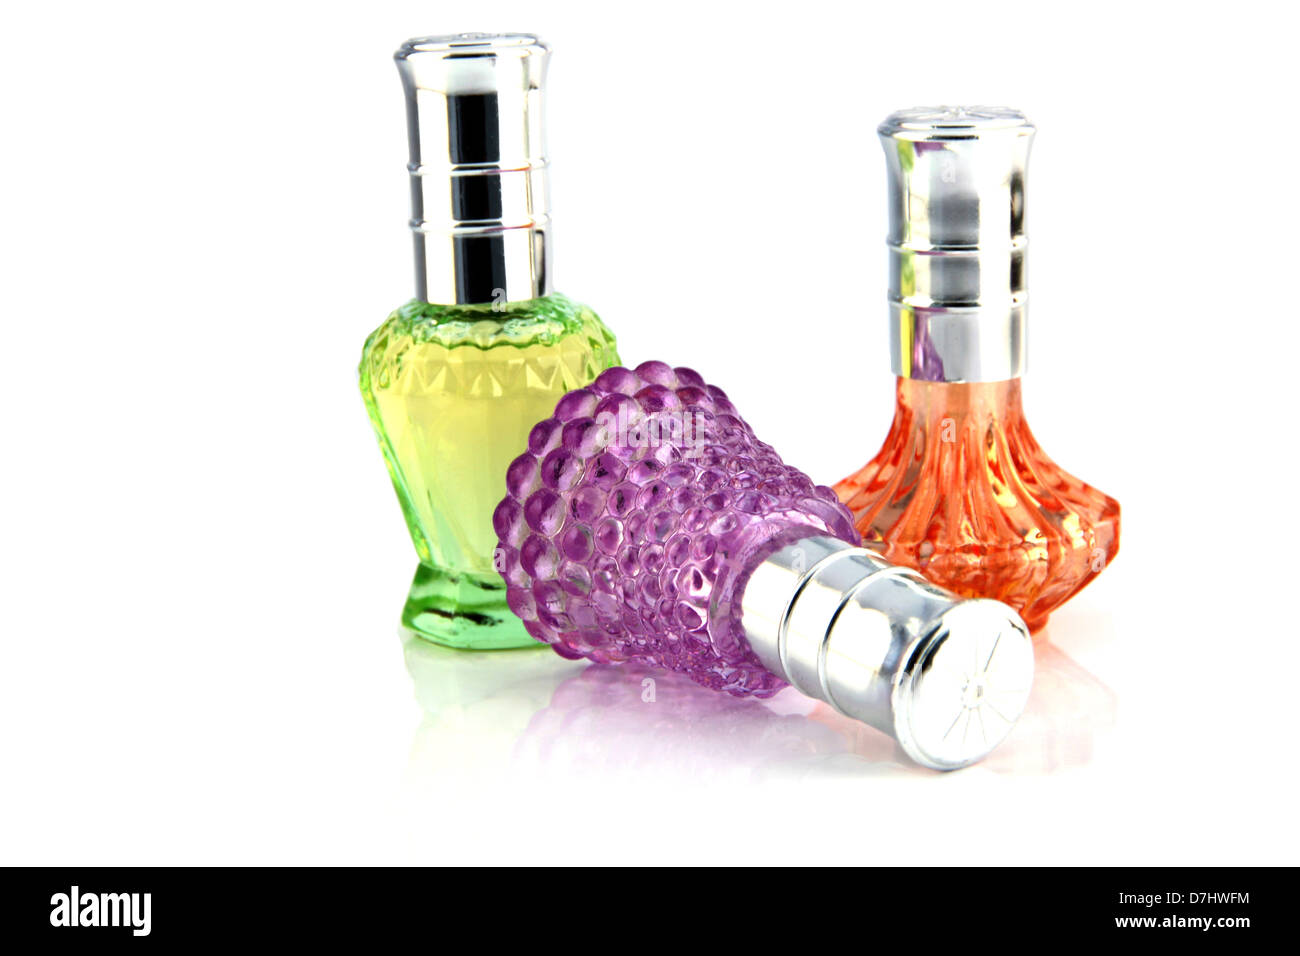 Three colors Perfume bottle resting on a white background. Stock Photo